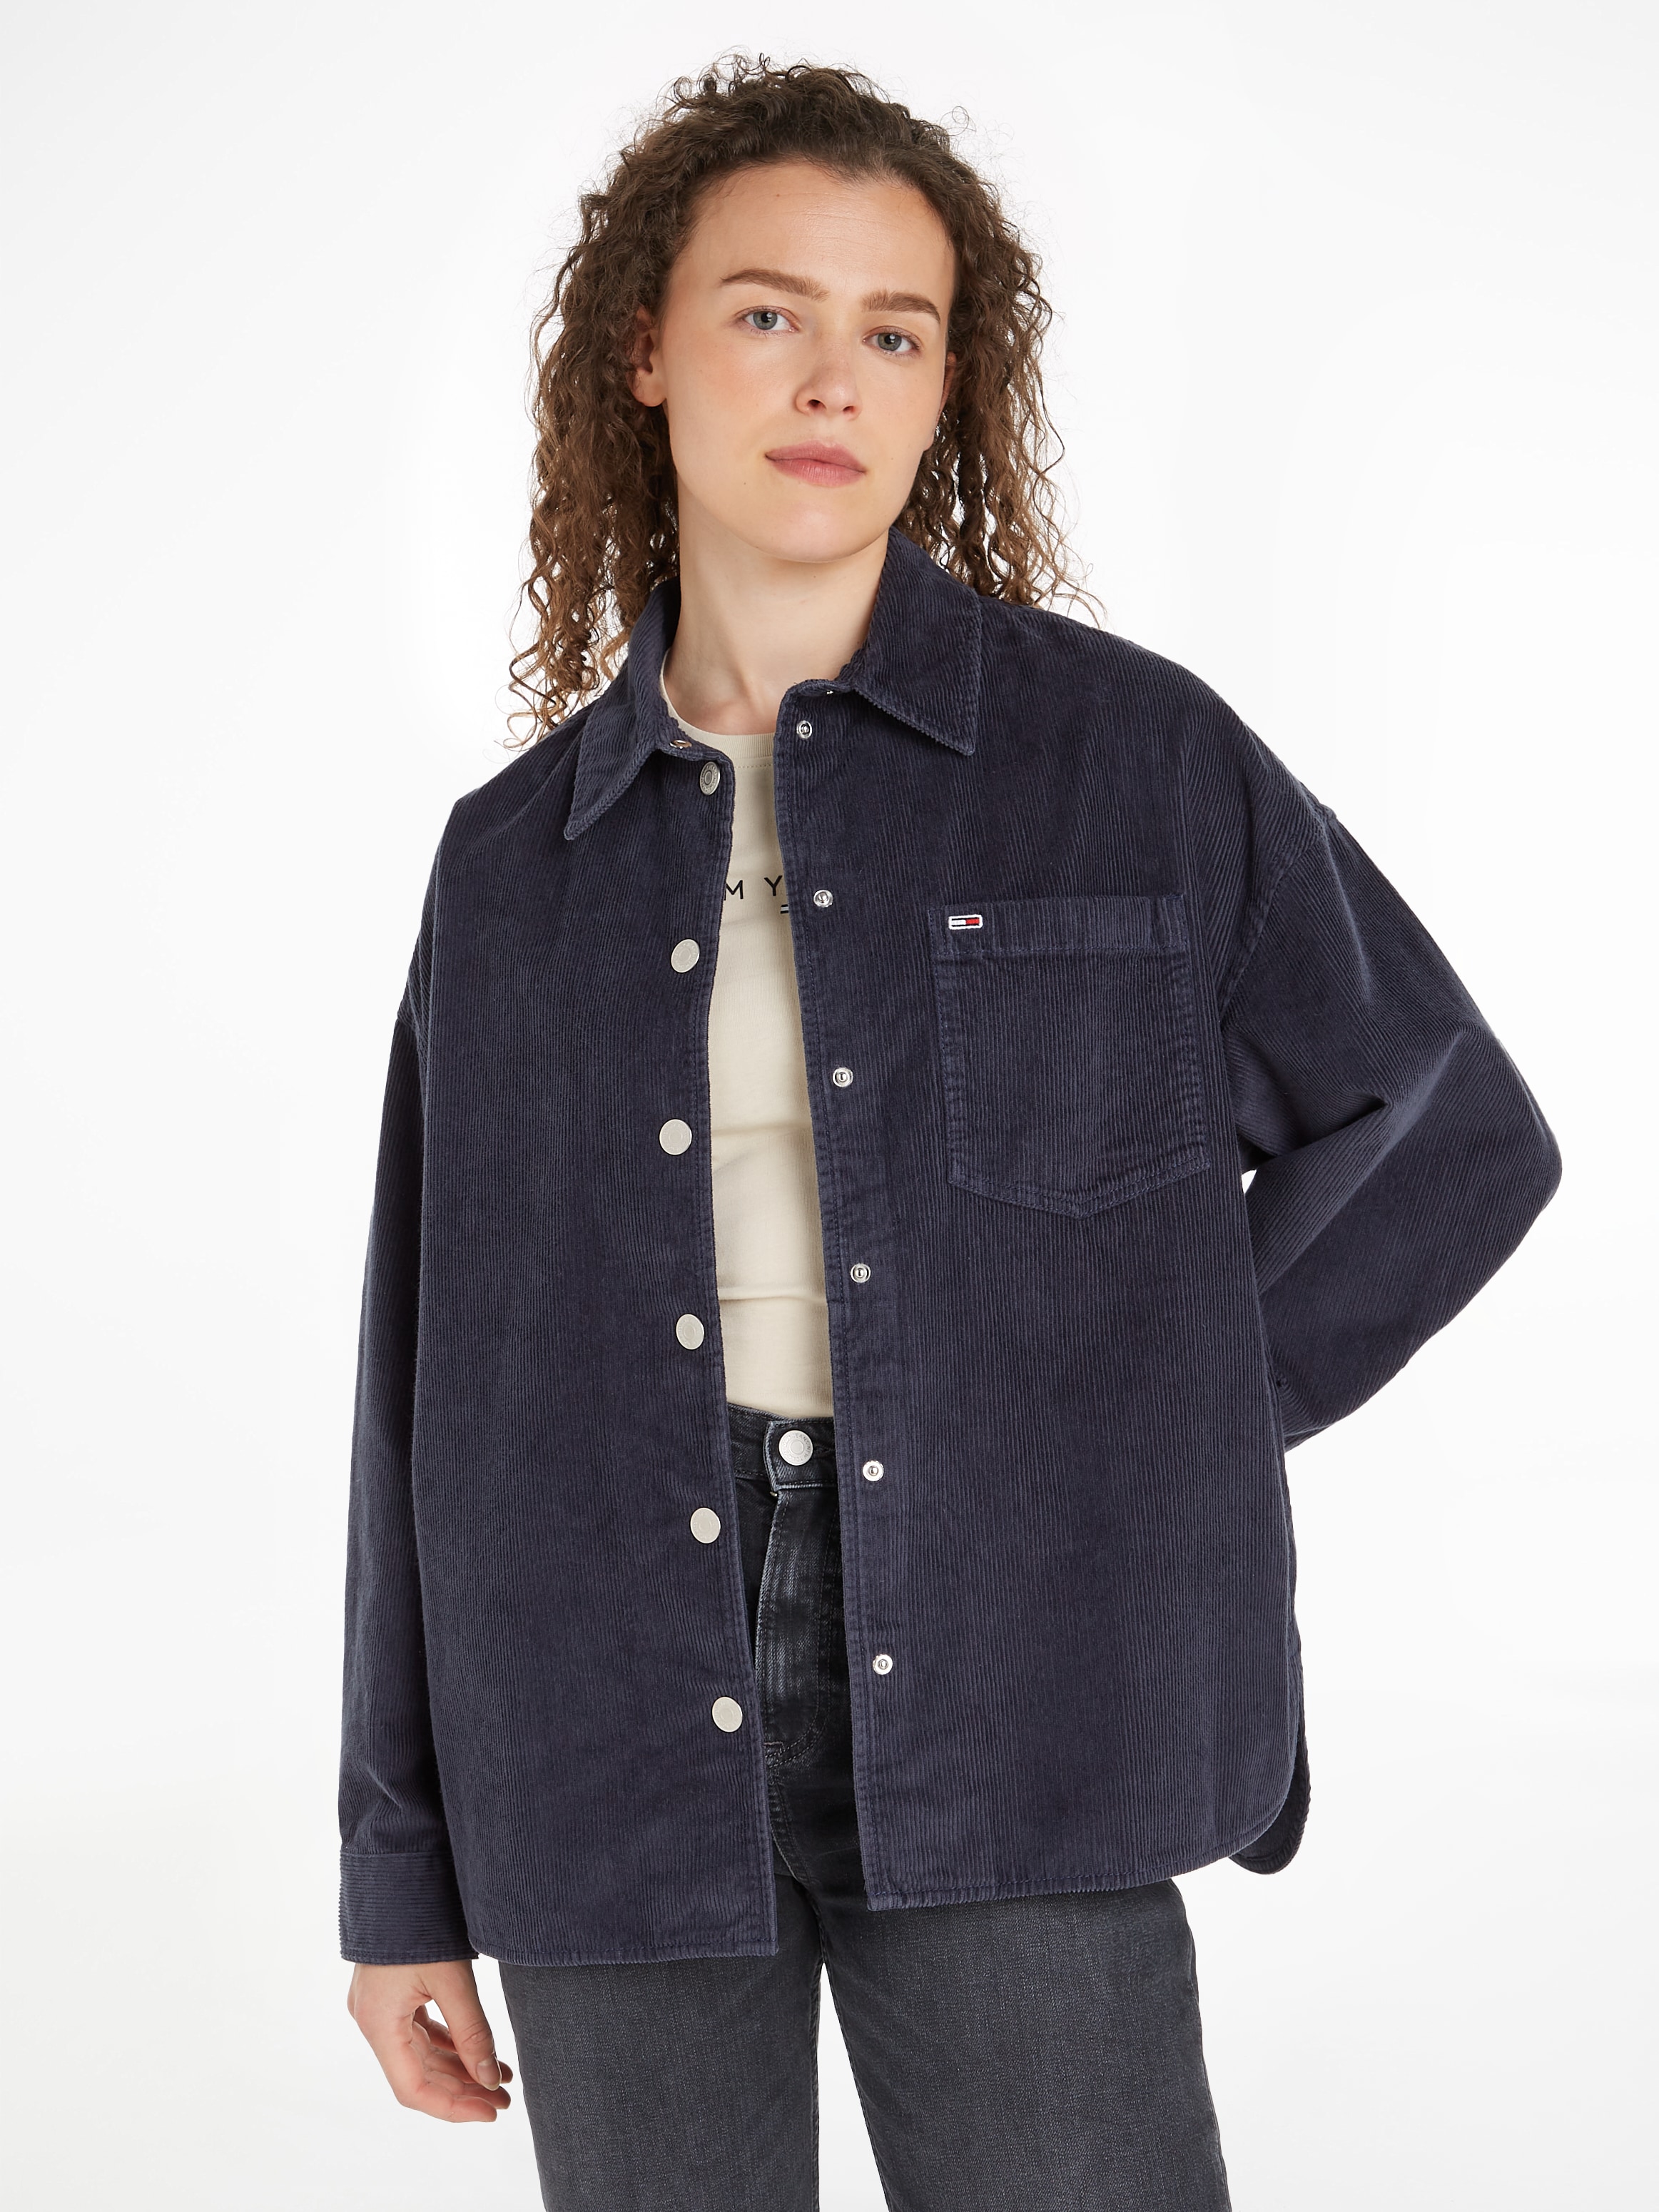 Tommy Jeans Hemdbluse »TJW WASHED CORD OVERSHIRT EXT«, aus Cord, modisches Overshirt